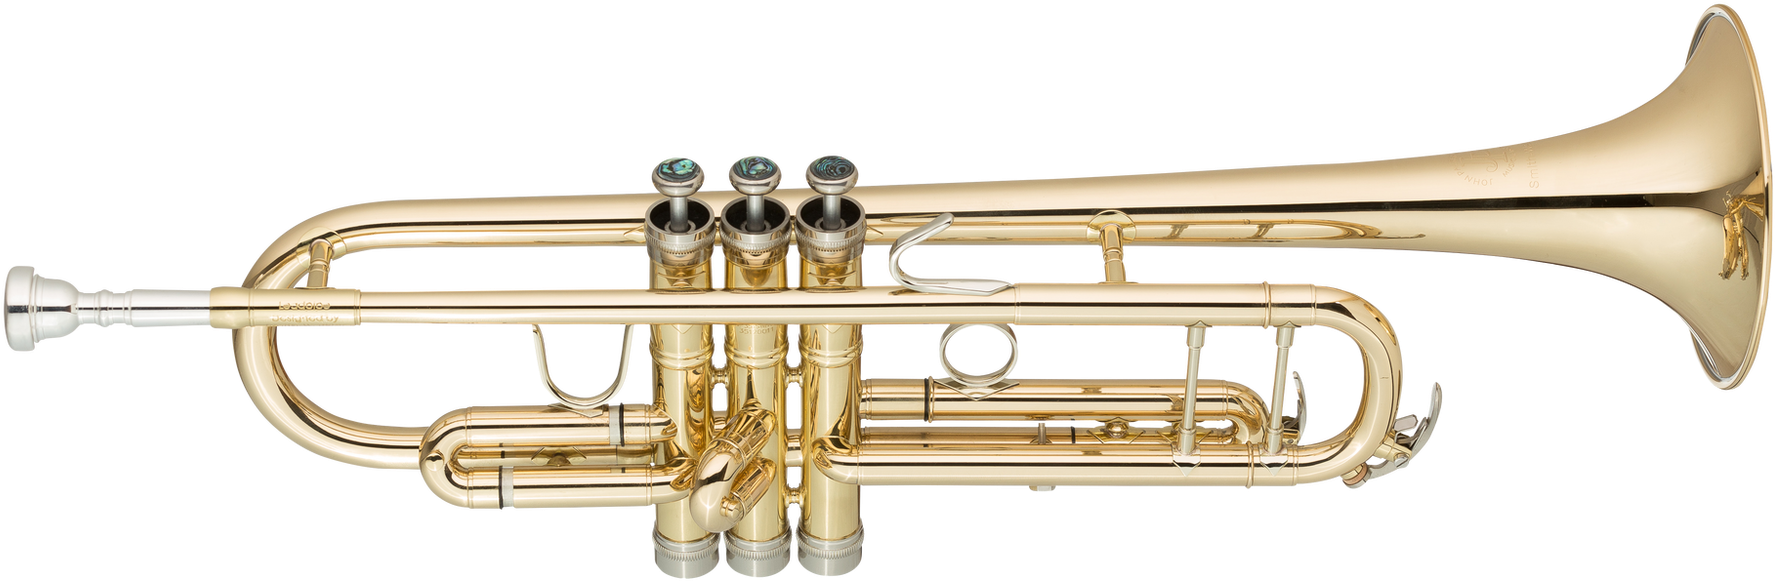 Gold Trumpet Isolatedon Background PNG